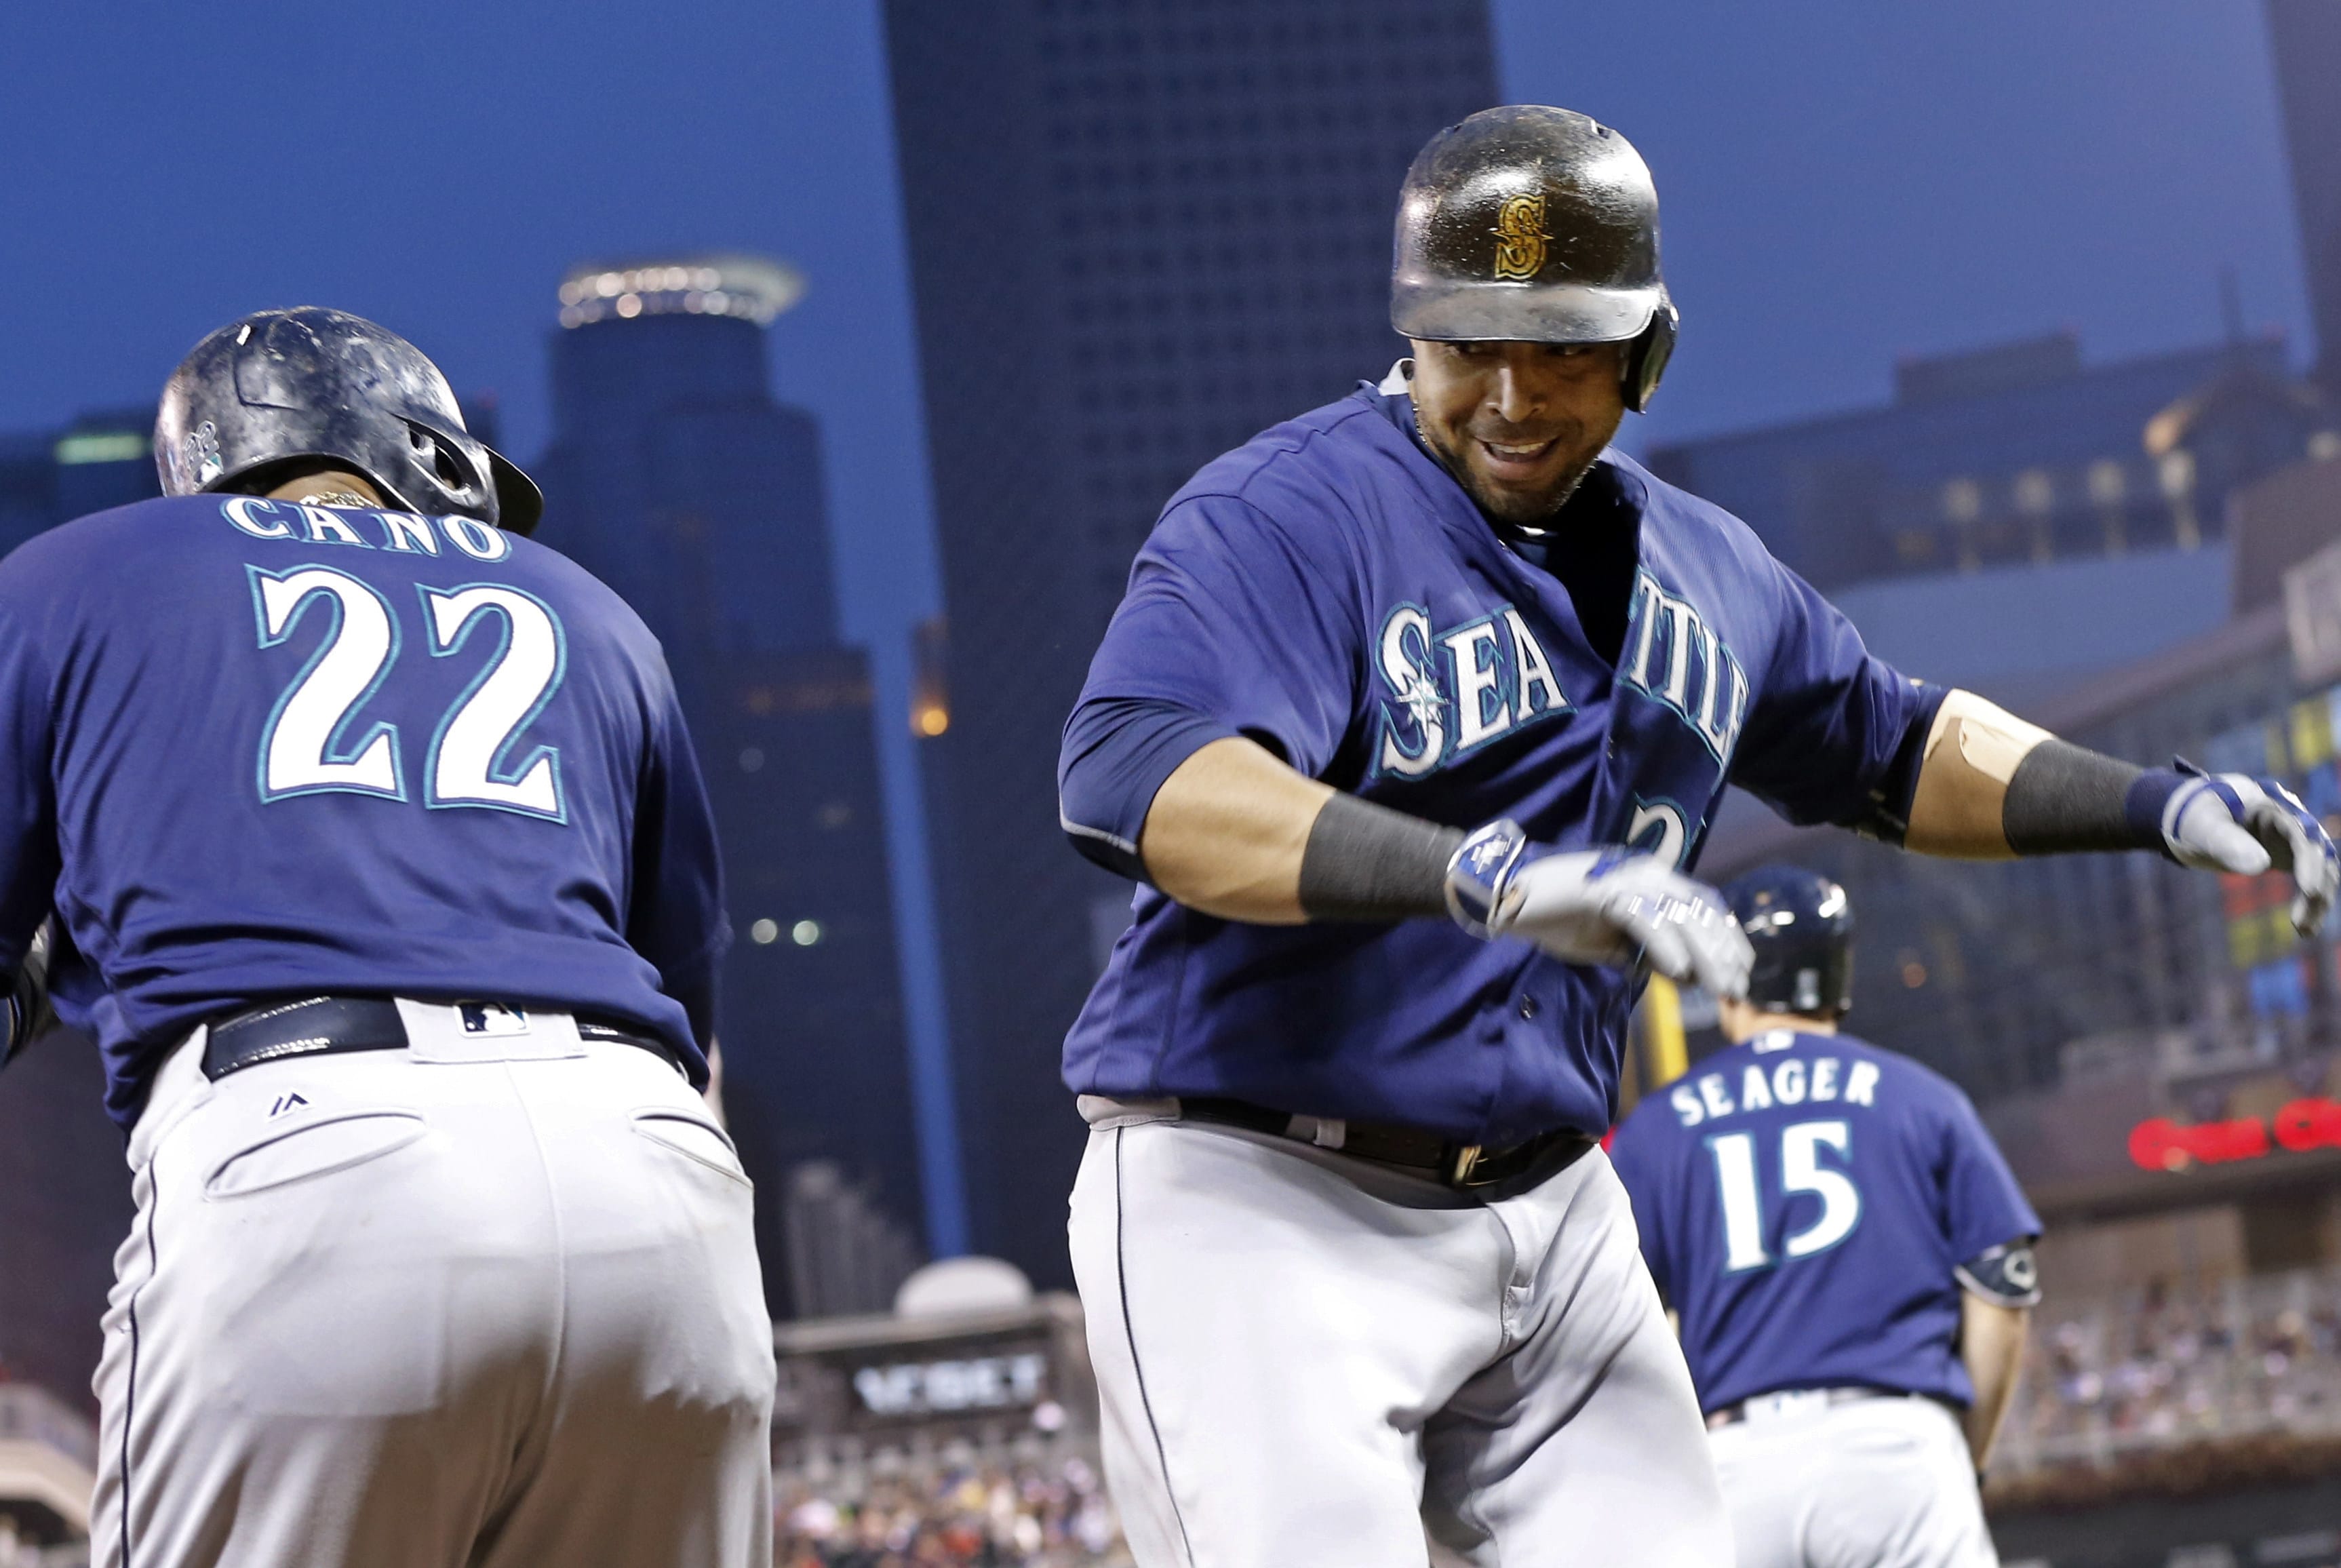 Seattle Mariners' Nelson Cruz, right, and Robinson Cano celebrate Cruz's two-run home run off Minnesota Twins pitcher Tyler Duffey during the fourth inning of a baseball game Saturday, Sept. 24, 2016, in Minneapolis.